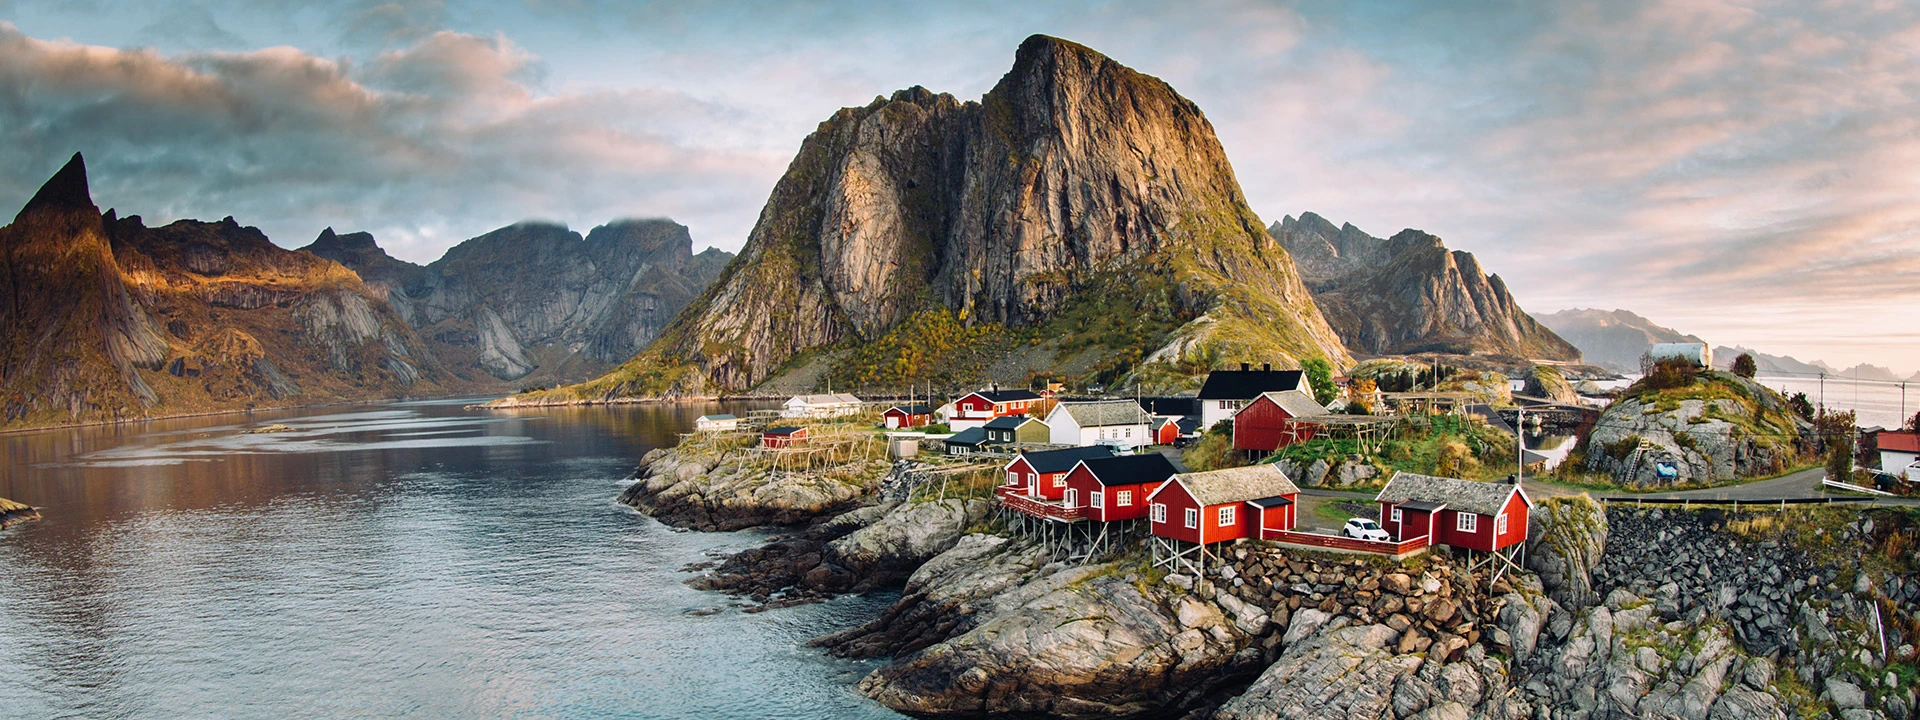 Northern Europe cruise at the Lofoten islands archipelago in Norway